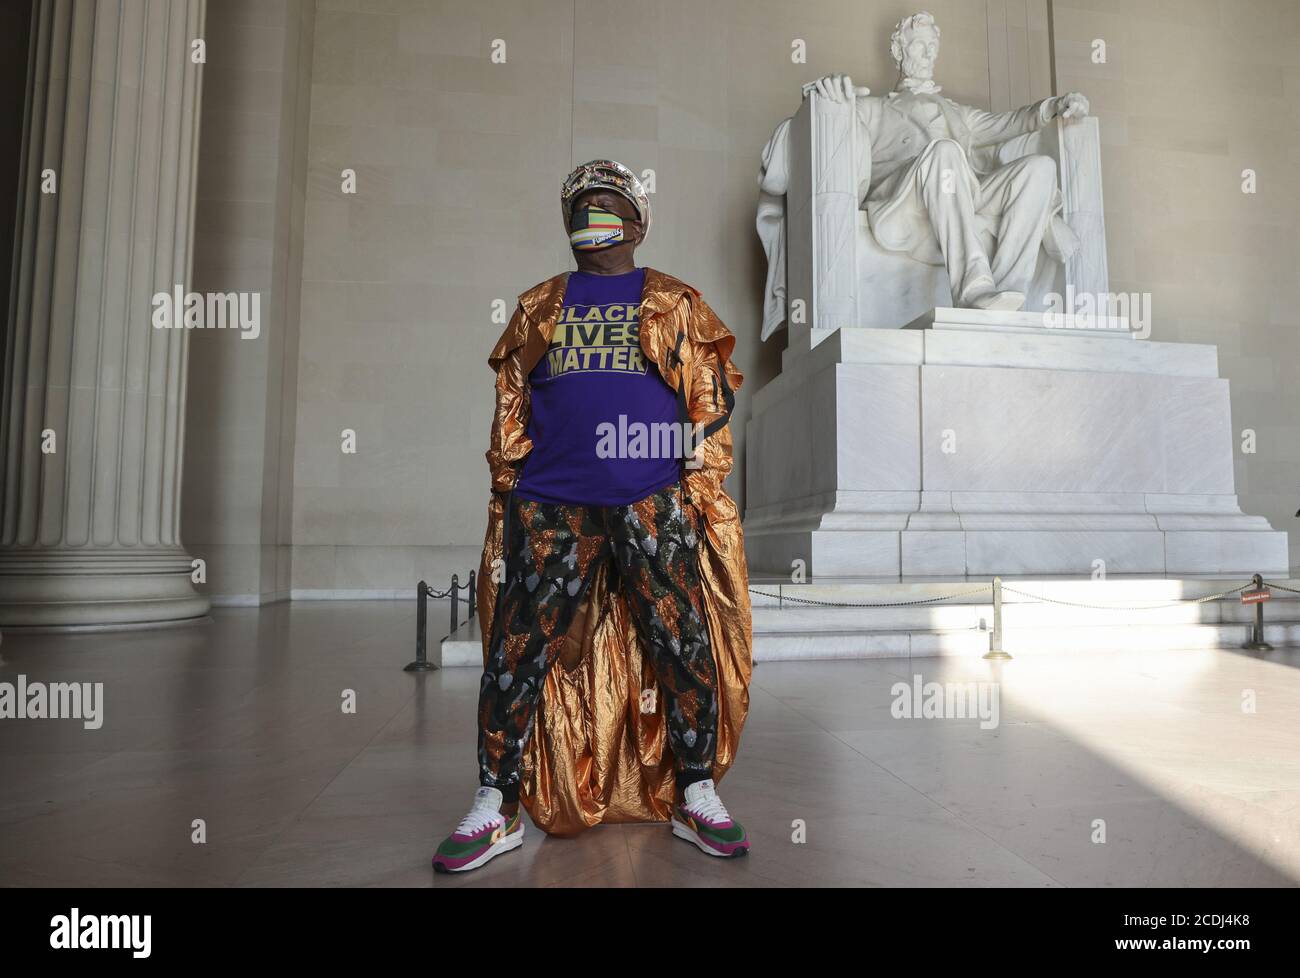 Washington, United States. 28th Aug, 2020. Singer and songwriter George Clinton of Parliament Funkadelic stands inside teh Lincoln Memorial before delivering remarks during the 'Commitment March: Get Your Knee Off Our Necks' civil rights rally in Washington, DC, on August 28, 2020. The 2020 March on Washington comes on the 57th anniversary of Dr. Martin Luther King's historic march, when he delivered his 'I Have a Dream' speech. Photo by Jonathan Earnst/UPI Credit: UPI/Alamy Live News Stock Photo